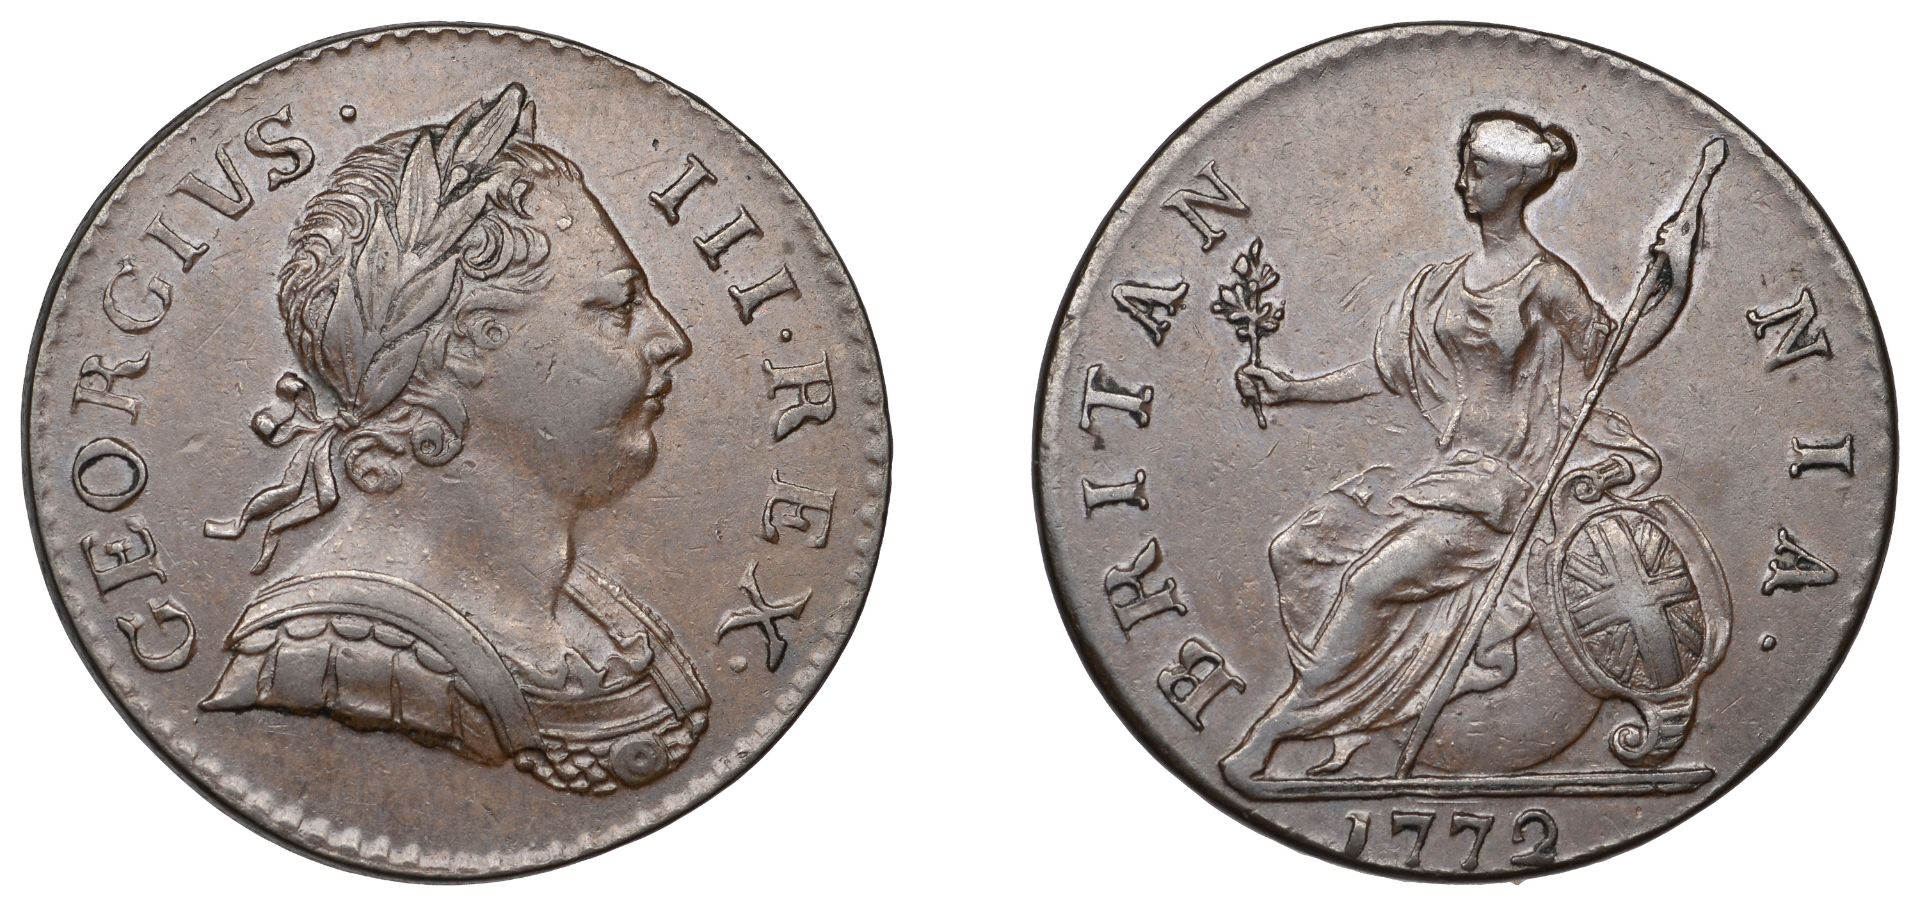 George III (1760-1820), Pre-1816 issues, Halfpenny, 1772 (BMC 902; S 3774). About extremely...